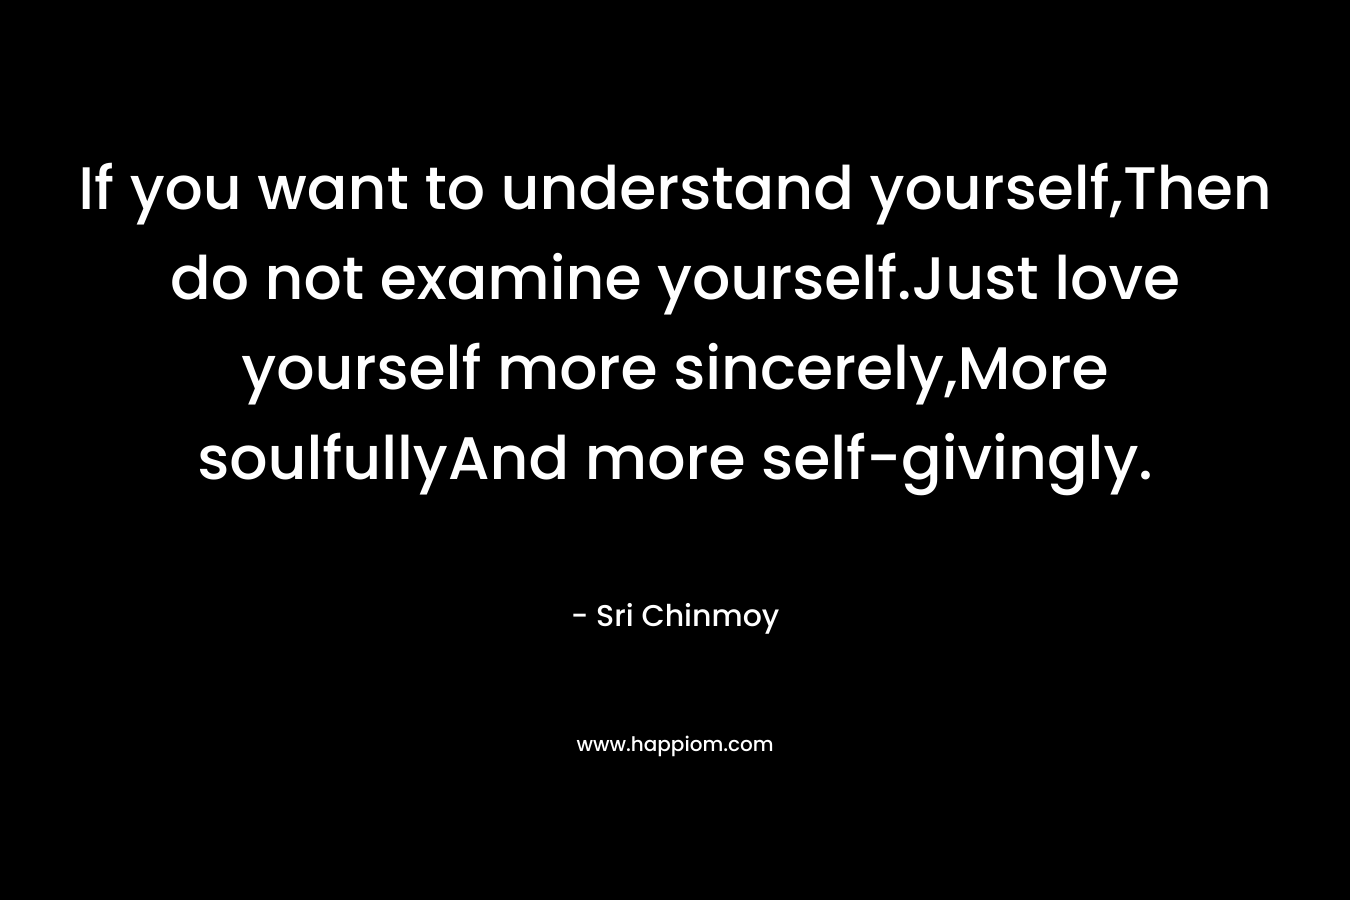 If you want to understand yourself,Then do not examine yourself.Just love yourself more sincerely,More soulfullyAnd more self-givingly.